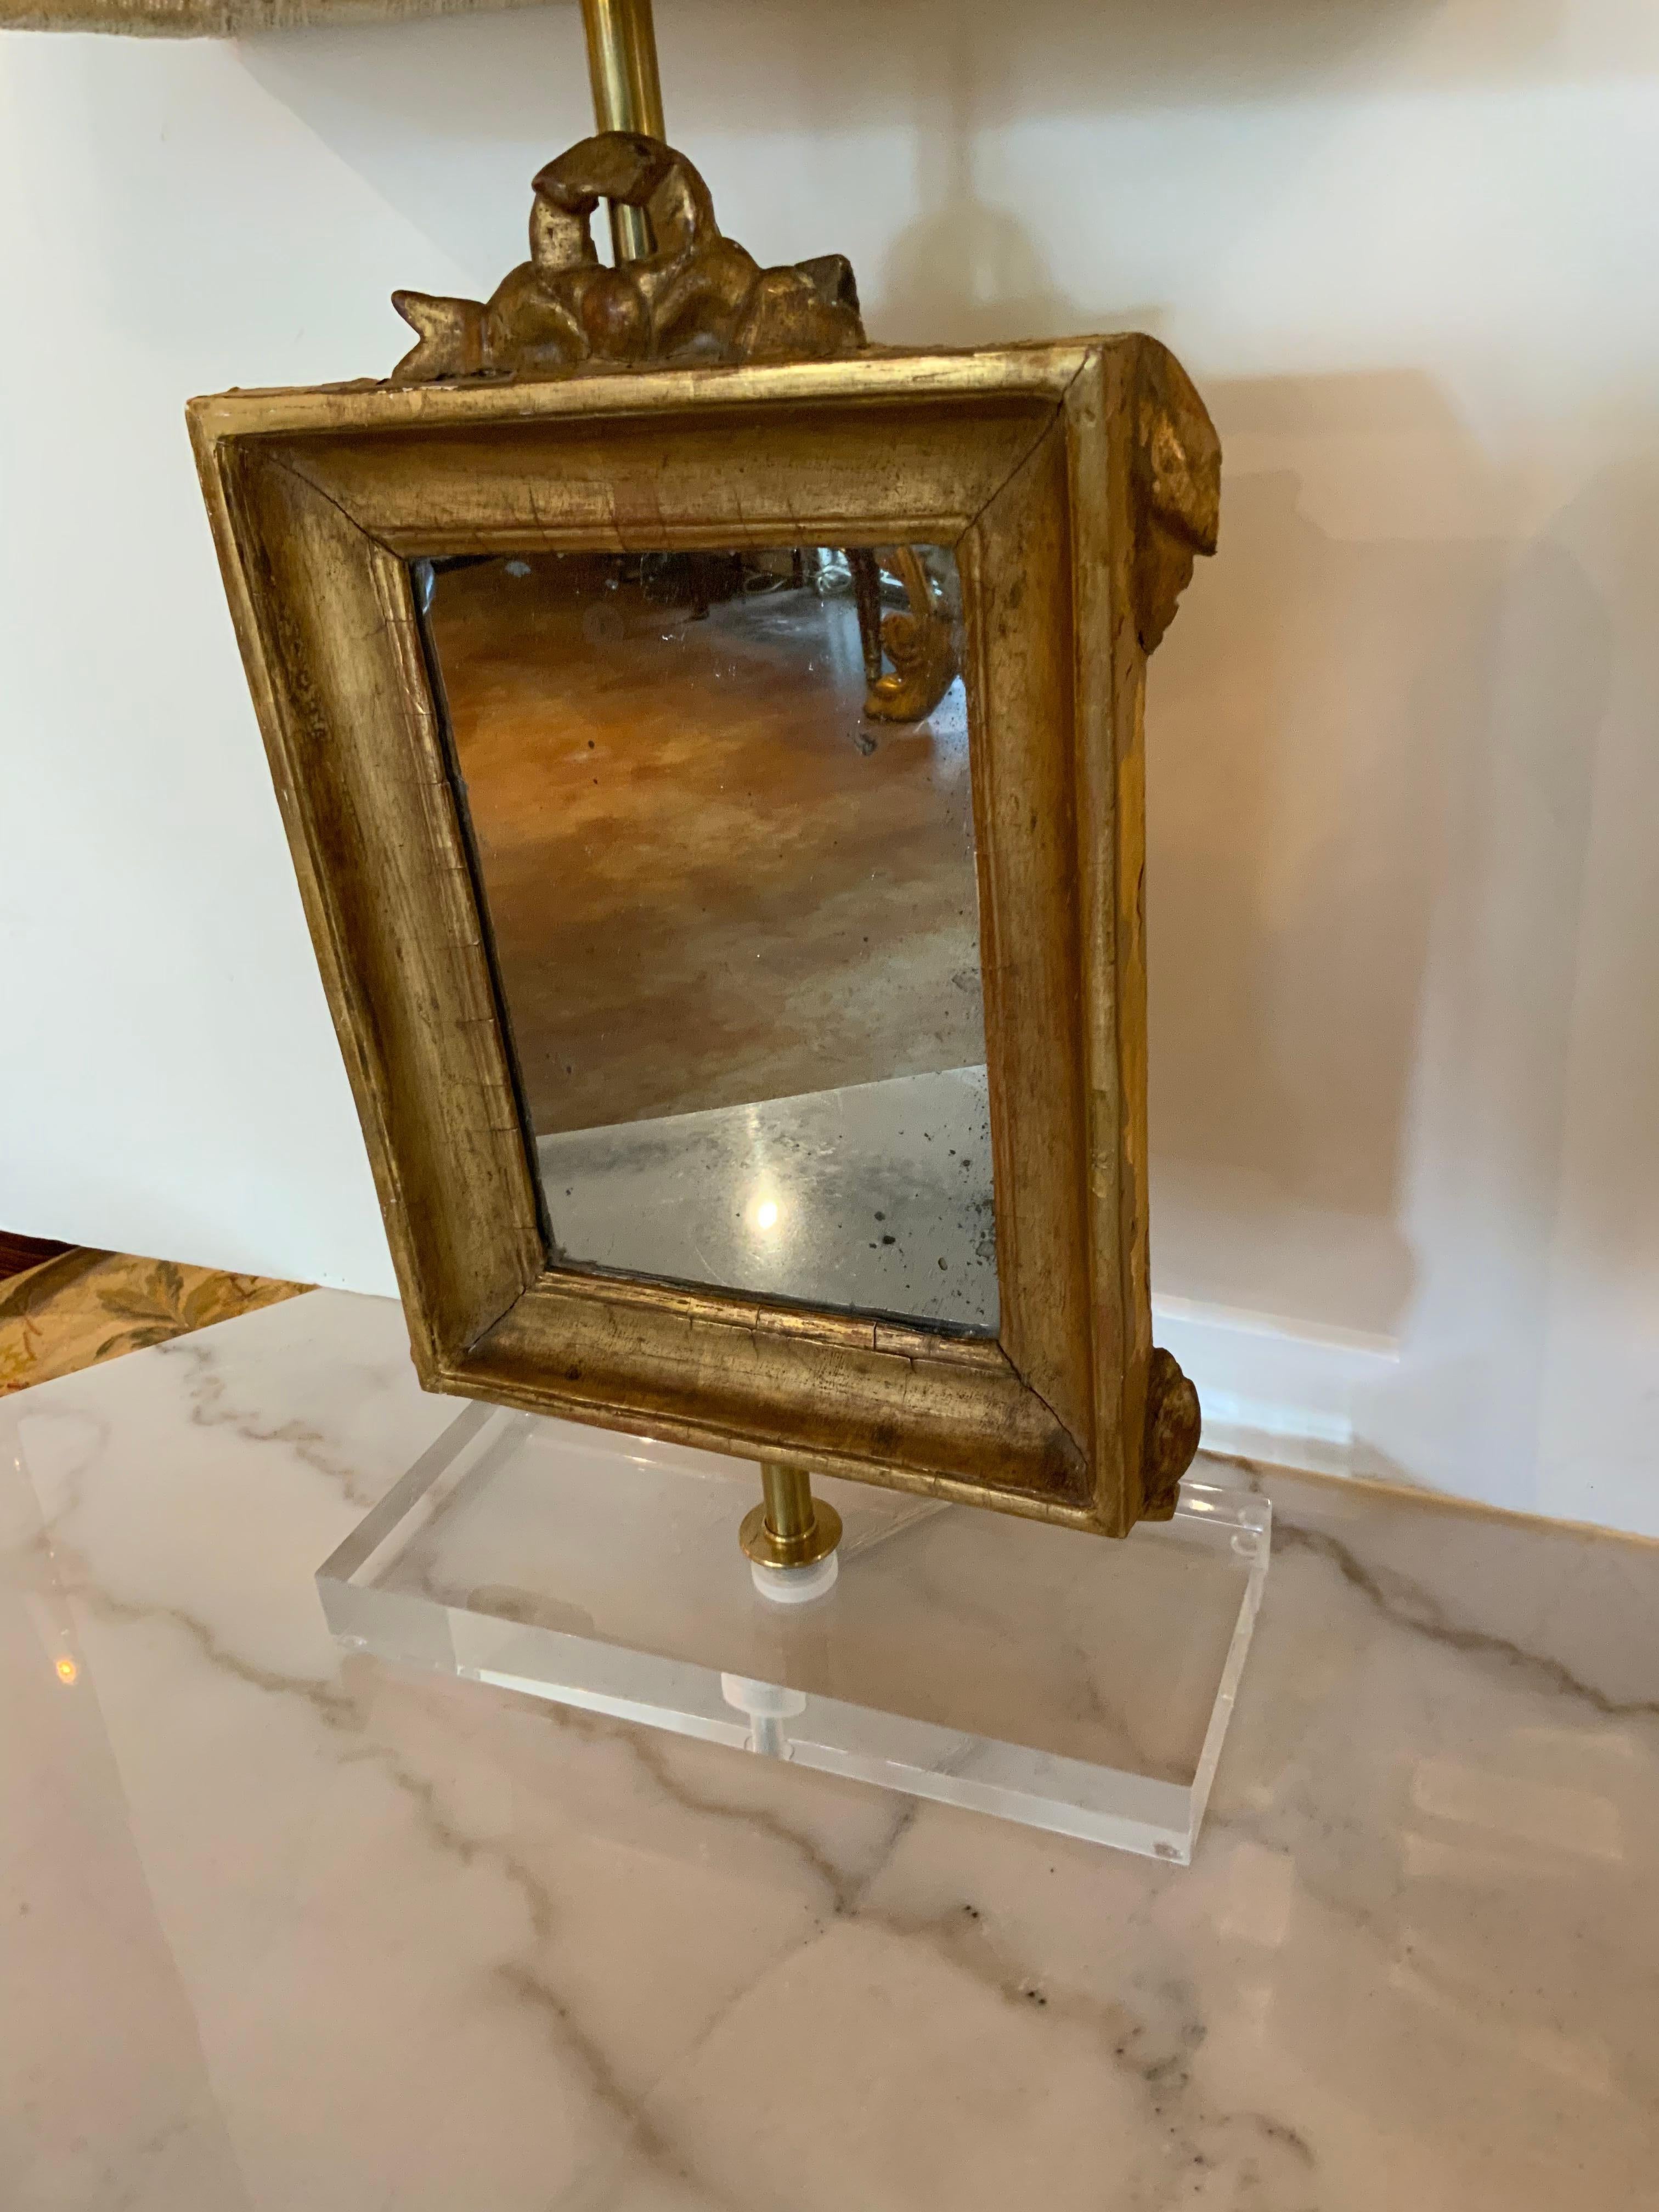 The mirrors with cove-molded frames, mounted on acrylic bases with shades.
The mirrors are 19th c.